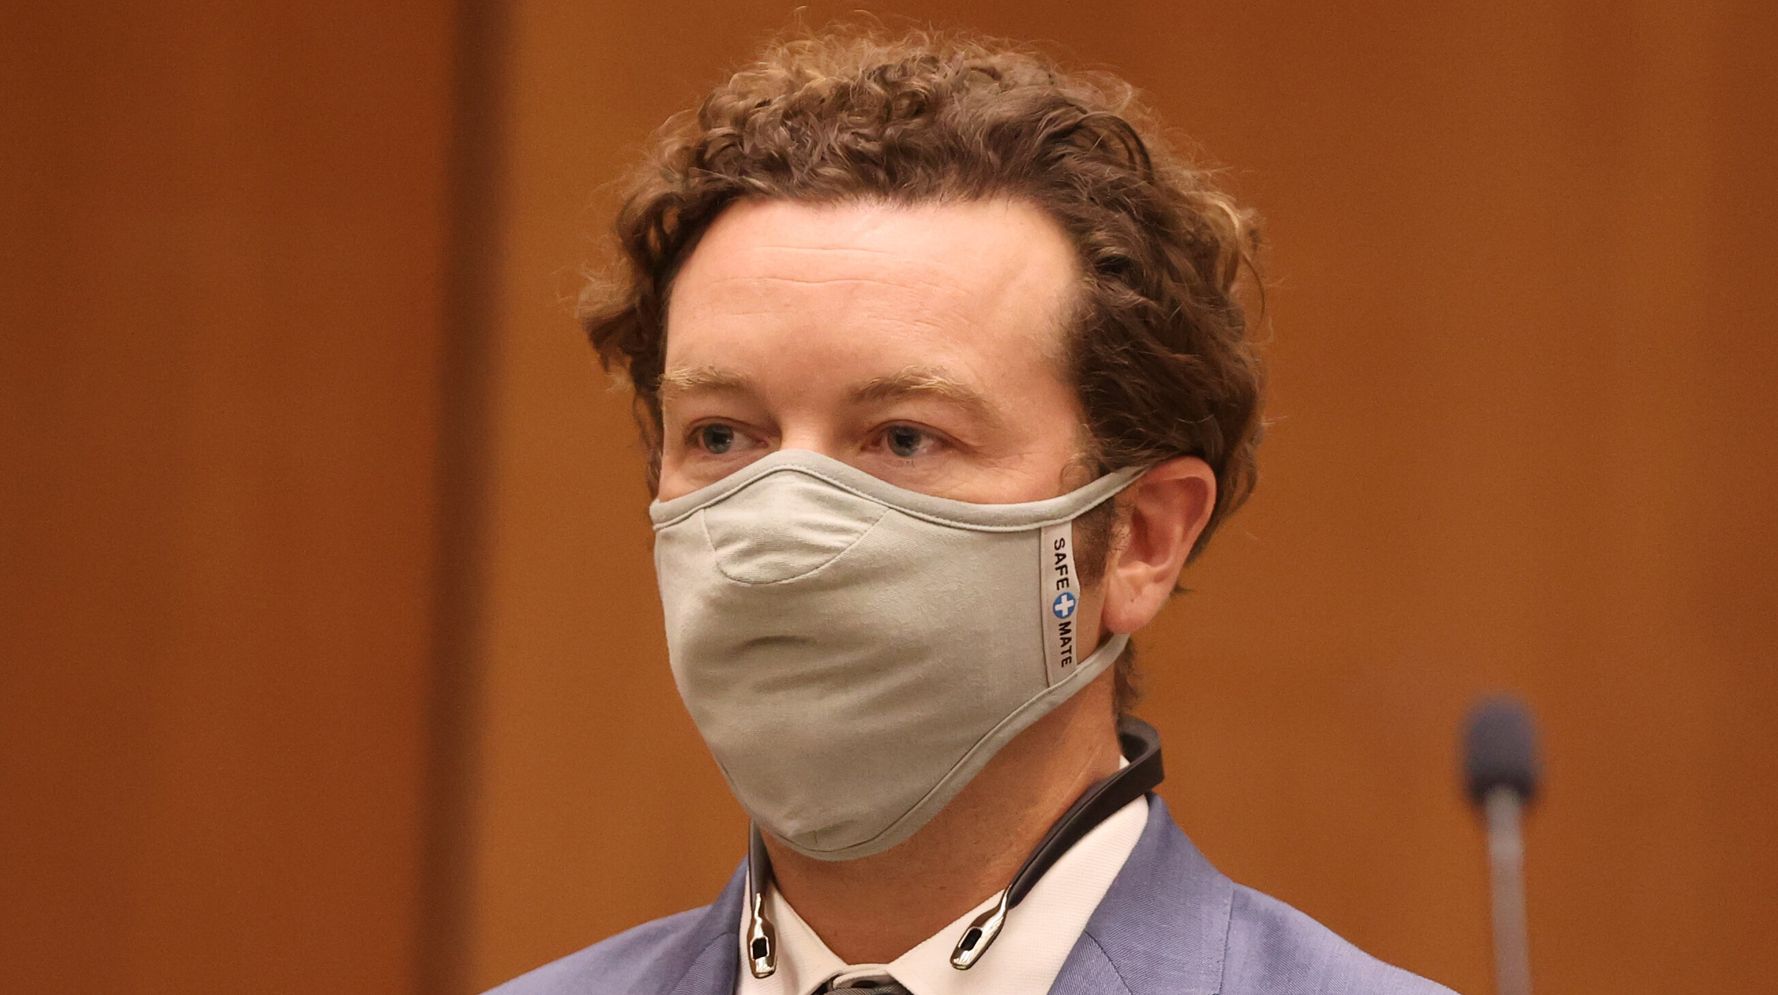 Woman Testifies She Woke Up And Found Actor Danny Masterson Was Raping Her